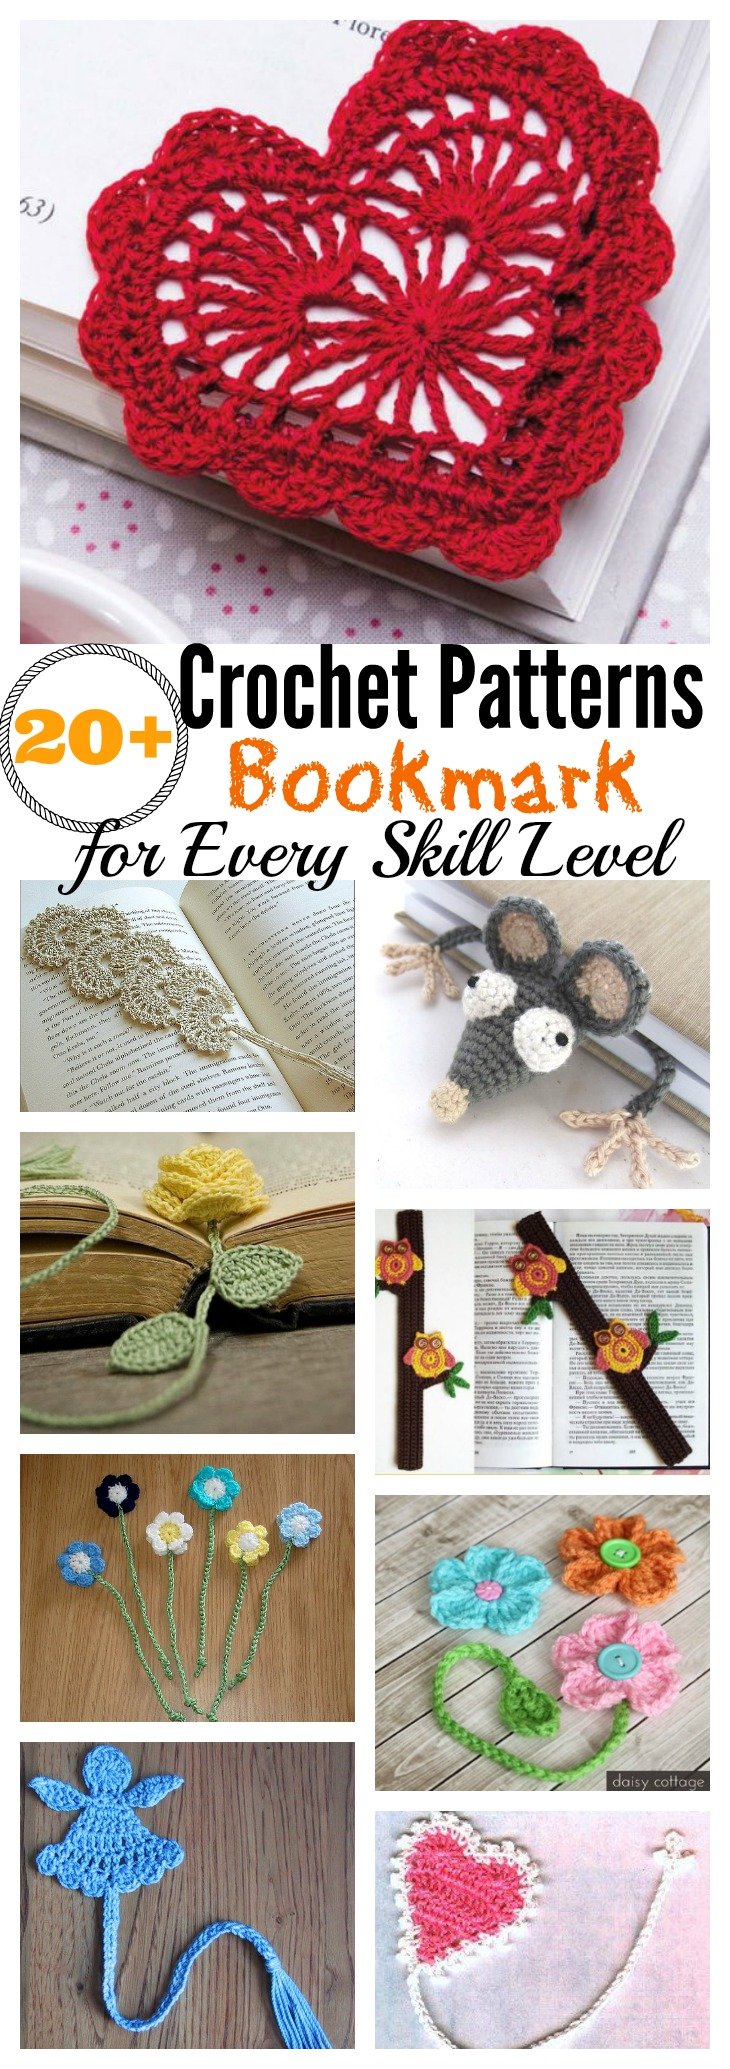 20+ Crochet Bookmark Patterns for Every Skill Level 